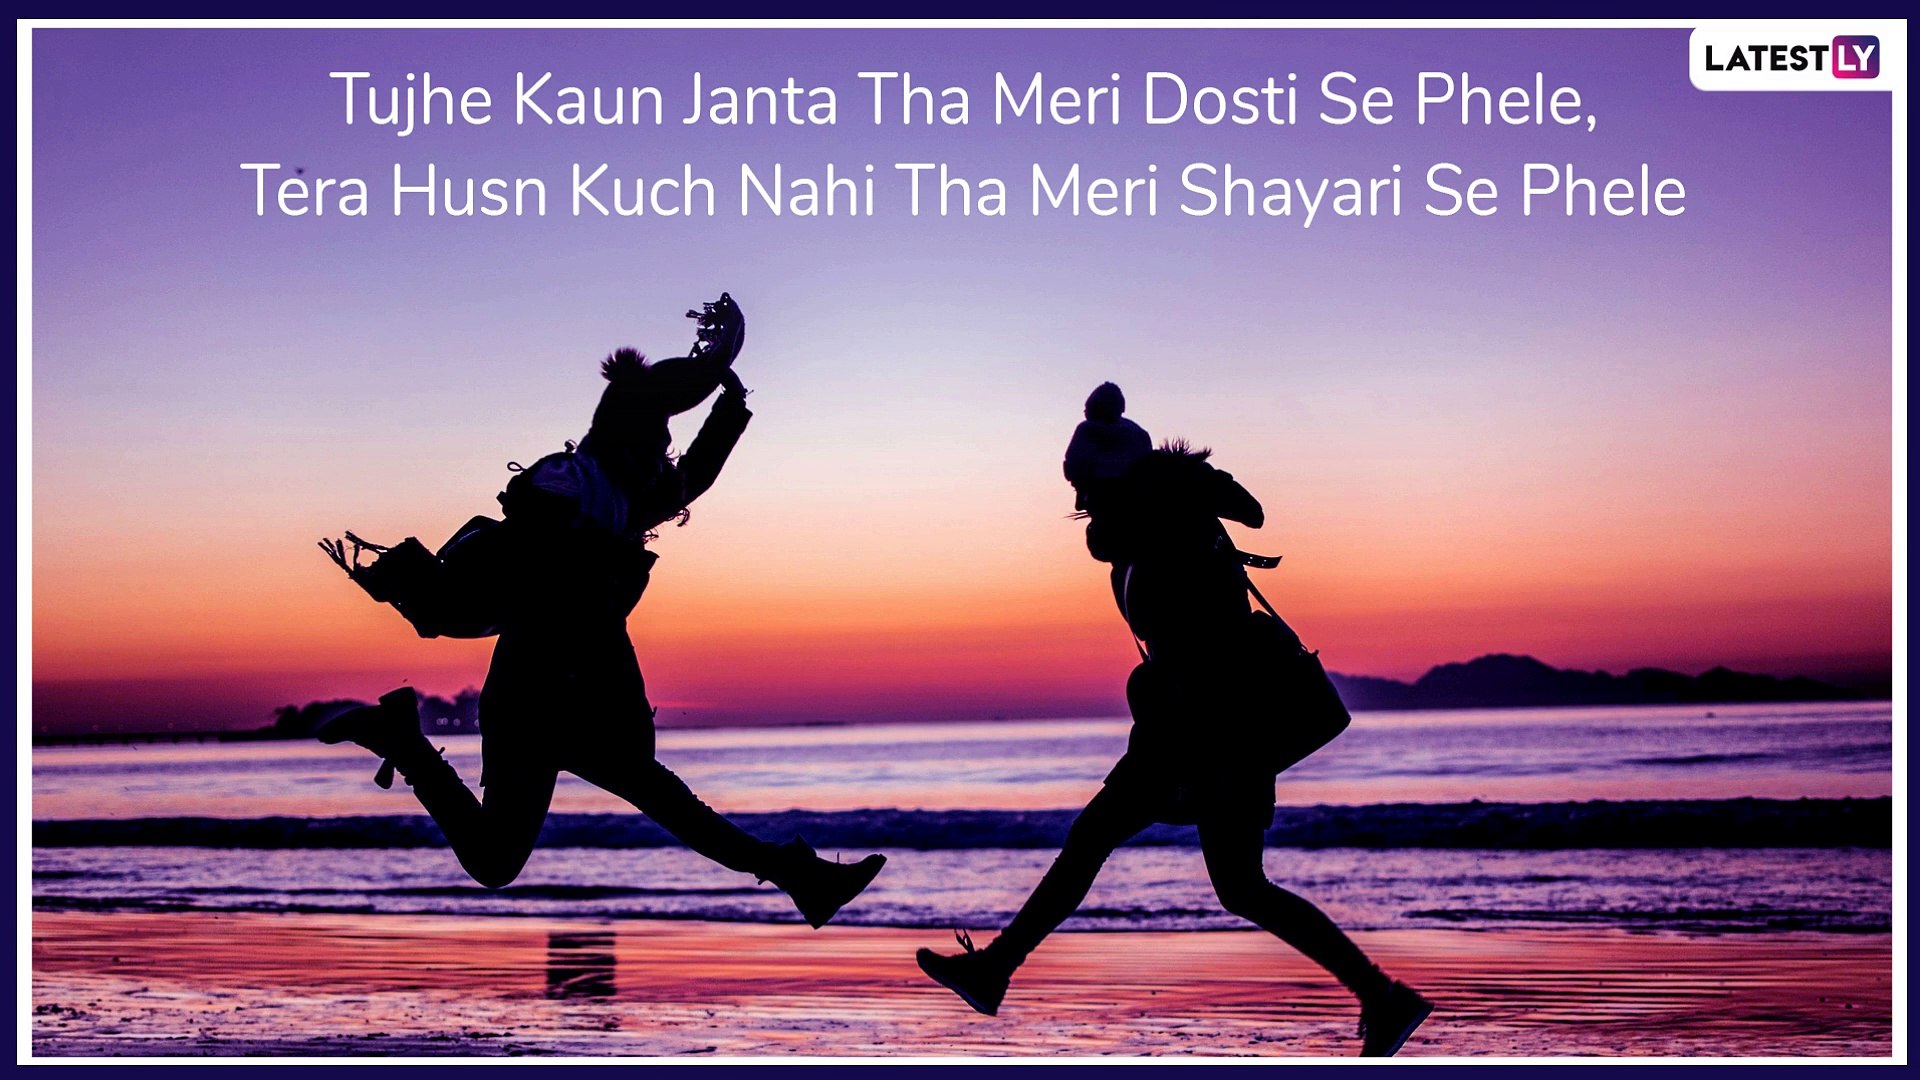 Friendship Day 2019 Wishes: Dosti Shayari in Hindi and Urdu To Share with  BFFs - video Dailymotion